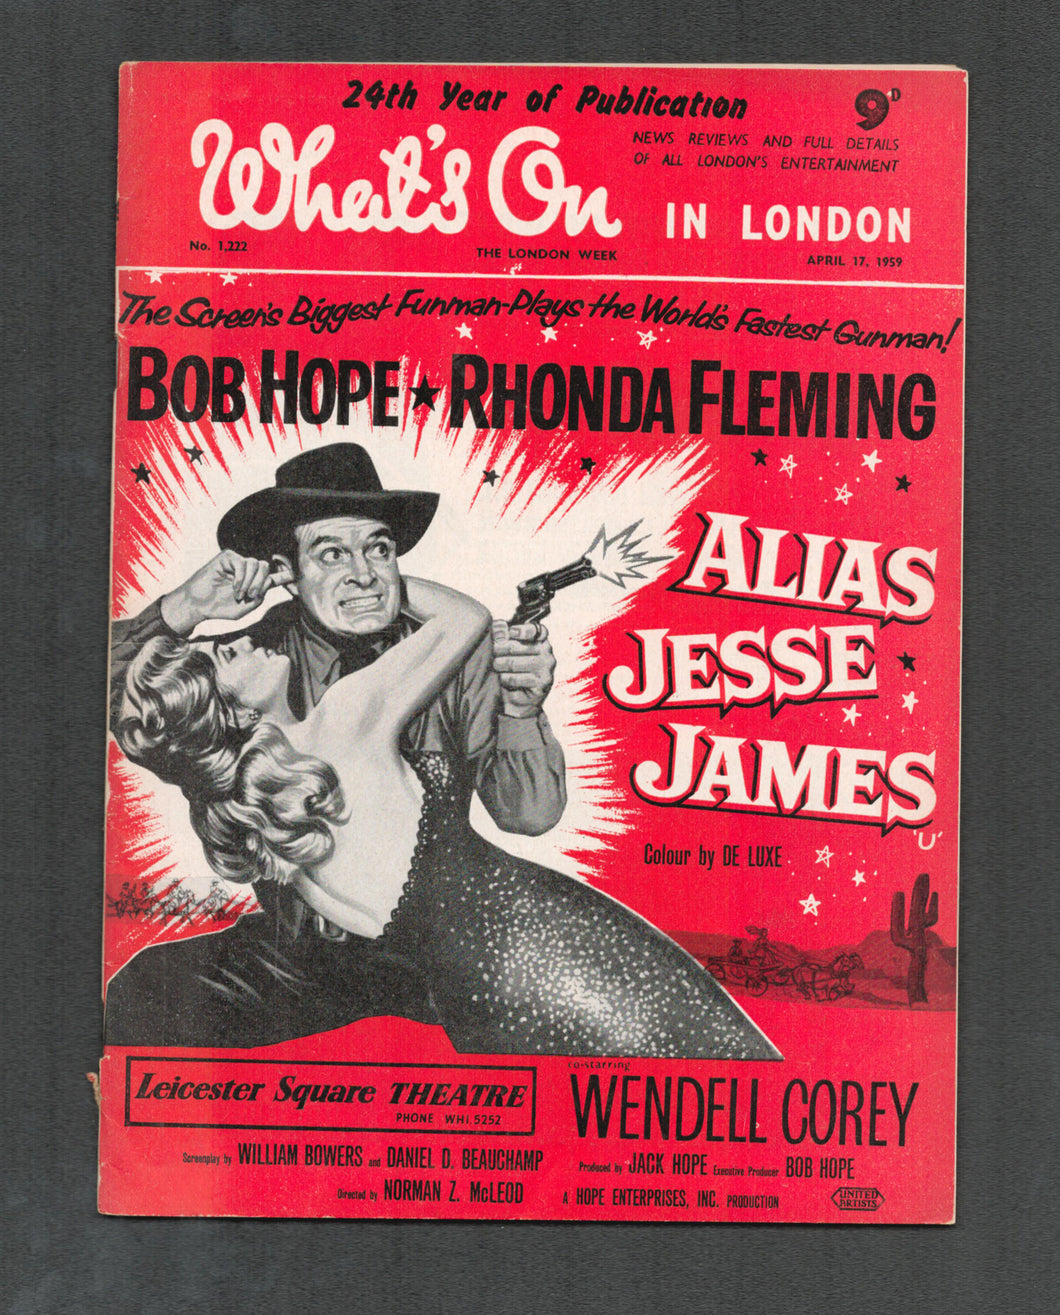 Whats On No 1222 April 17 1959